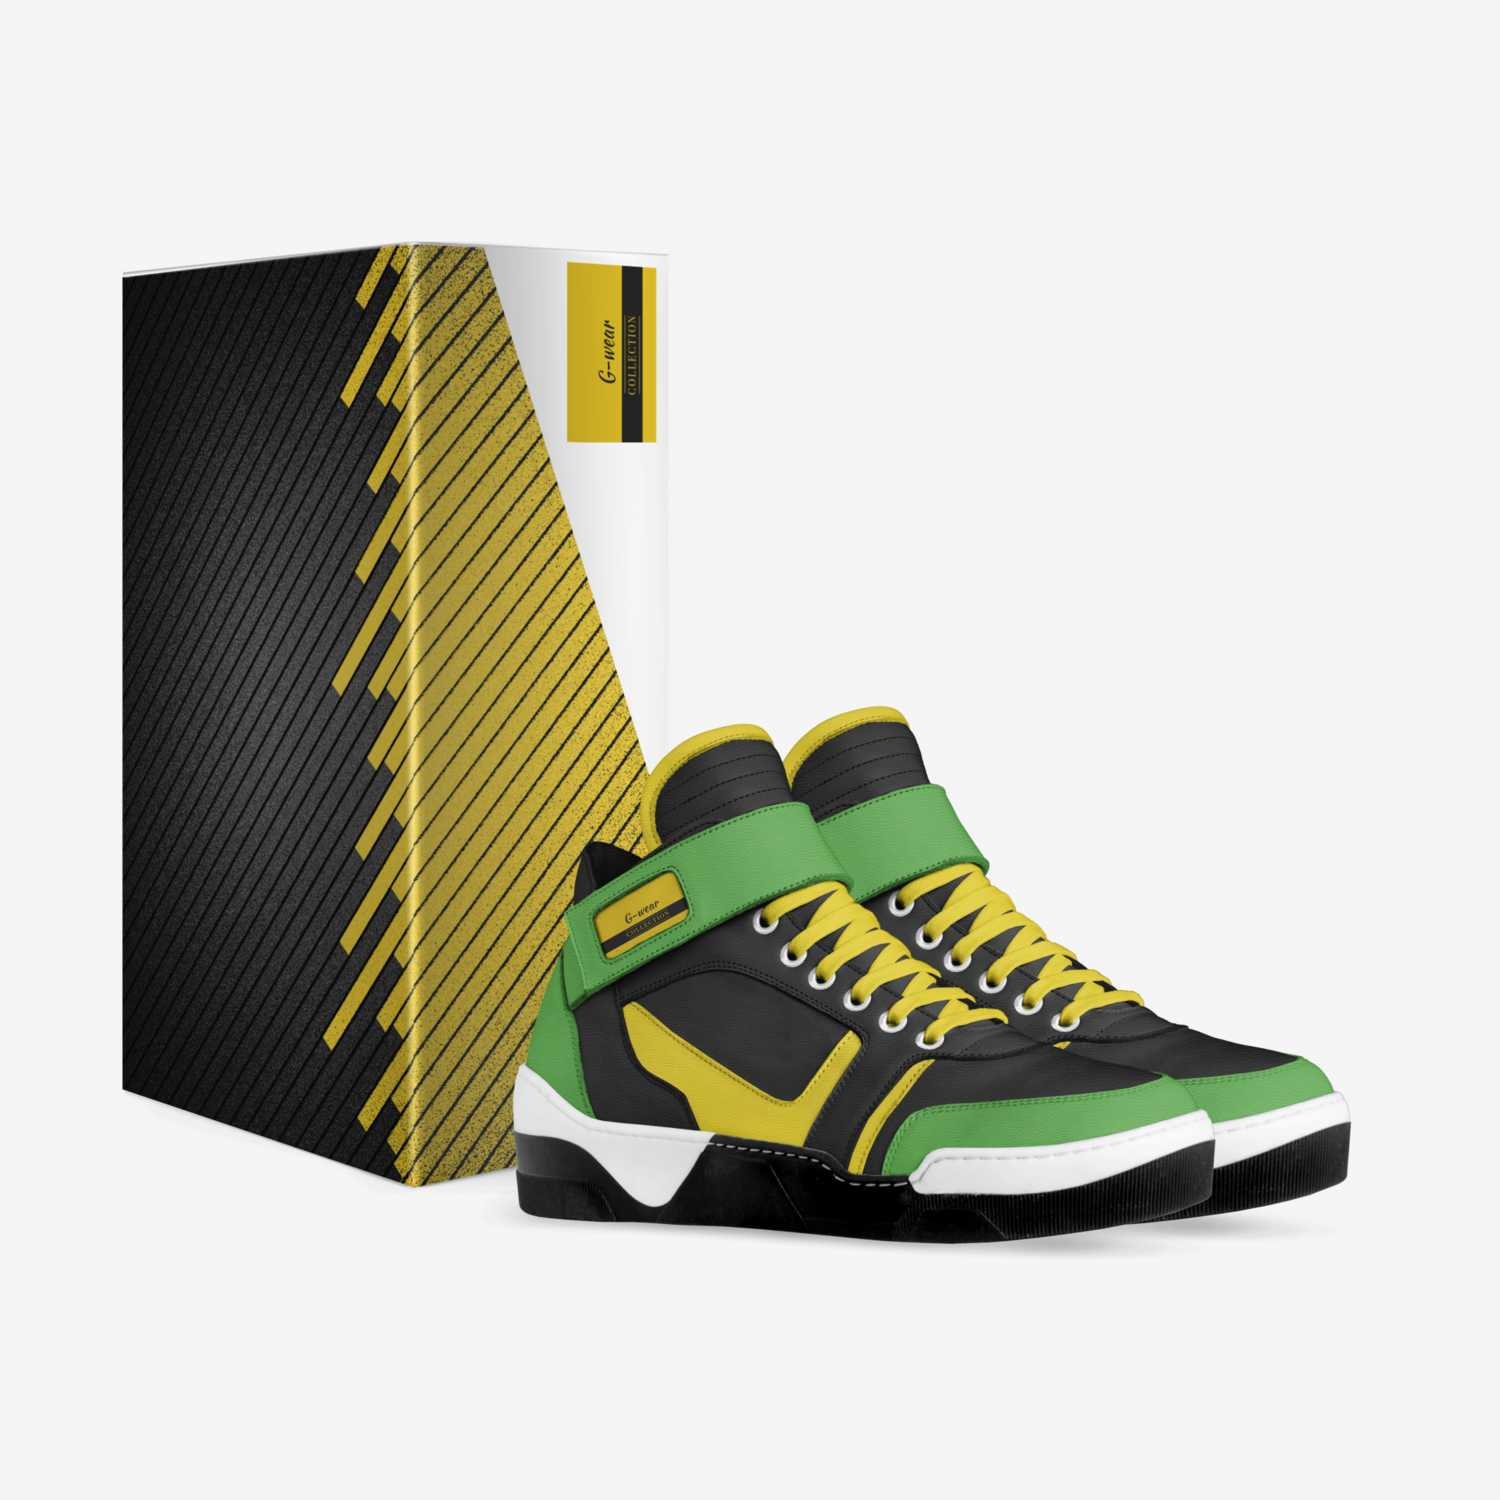 Gwear custom made in Italy shoes by Michael Mcneil | Box view